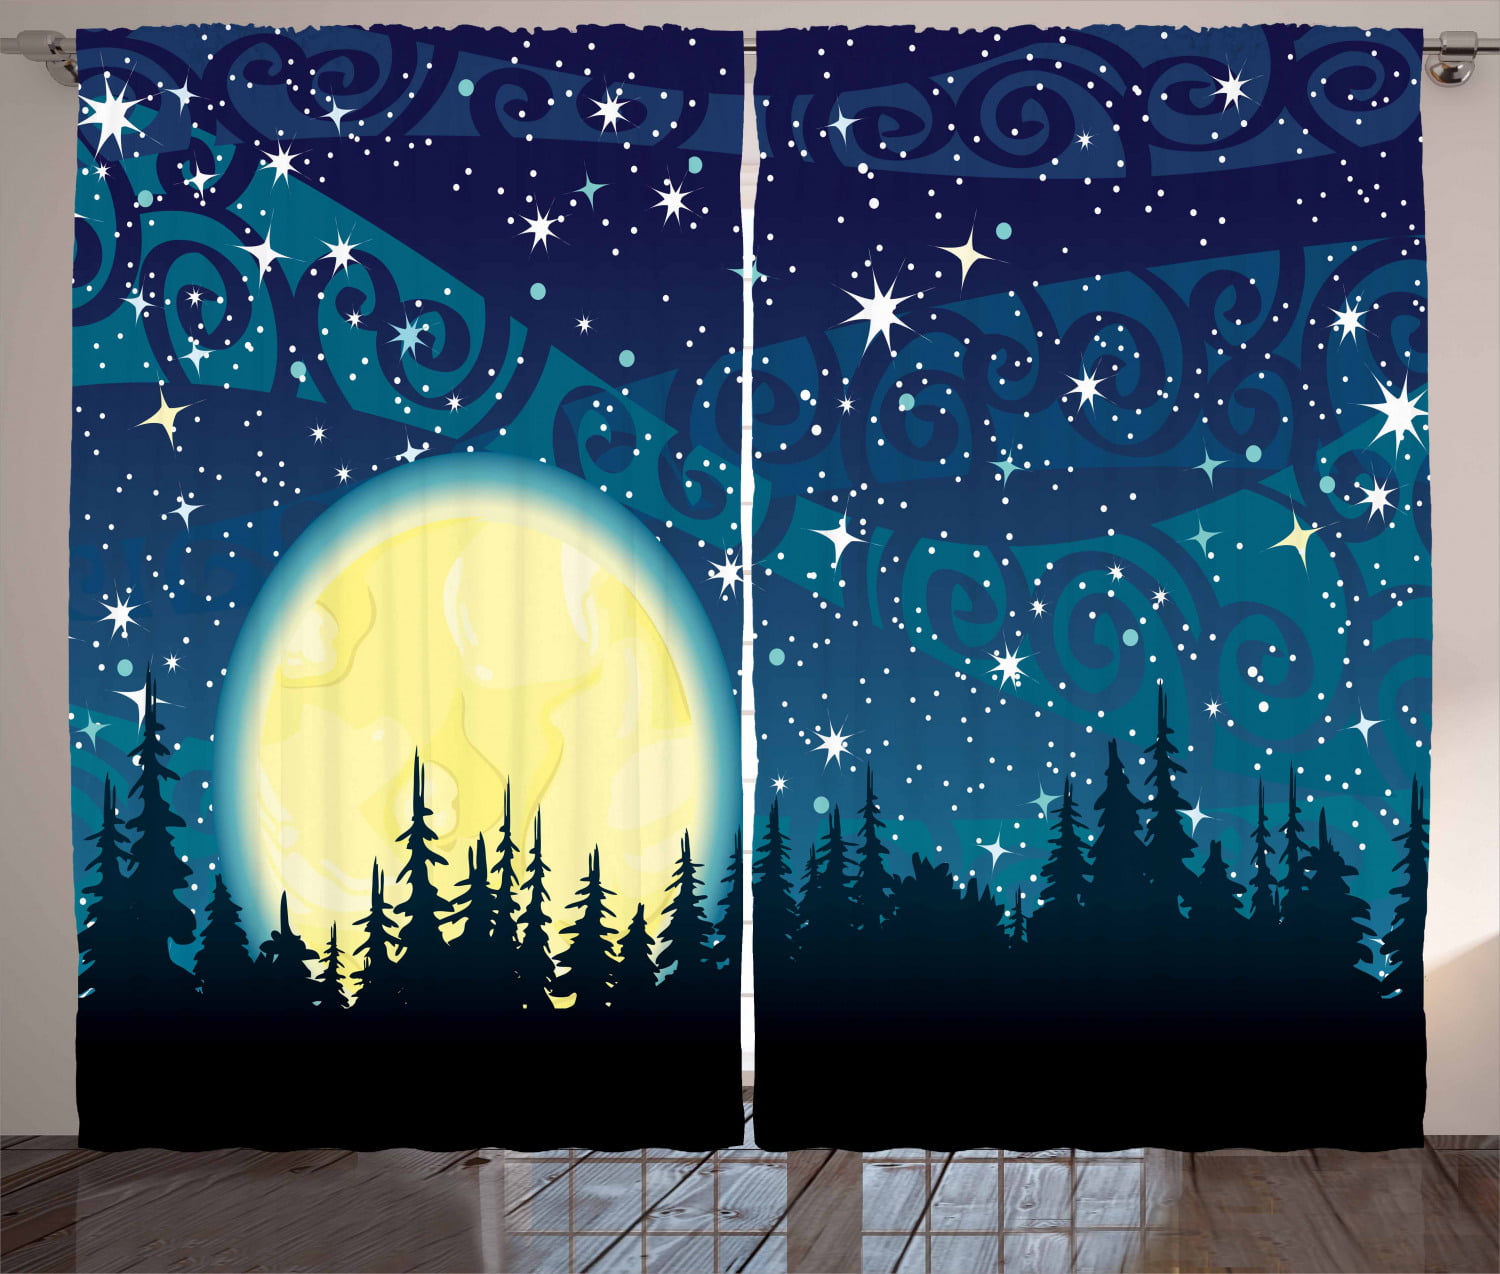 Details about   Night Starry Sky and Moon Window Curtain Curtains Drapes Galaxy Nebula Stars 